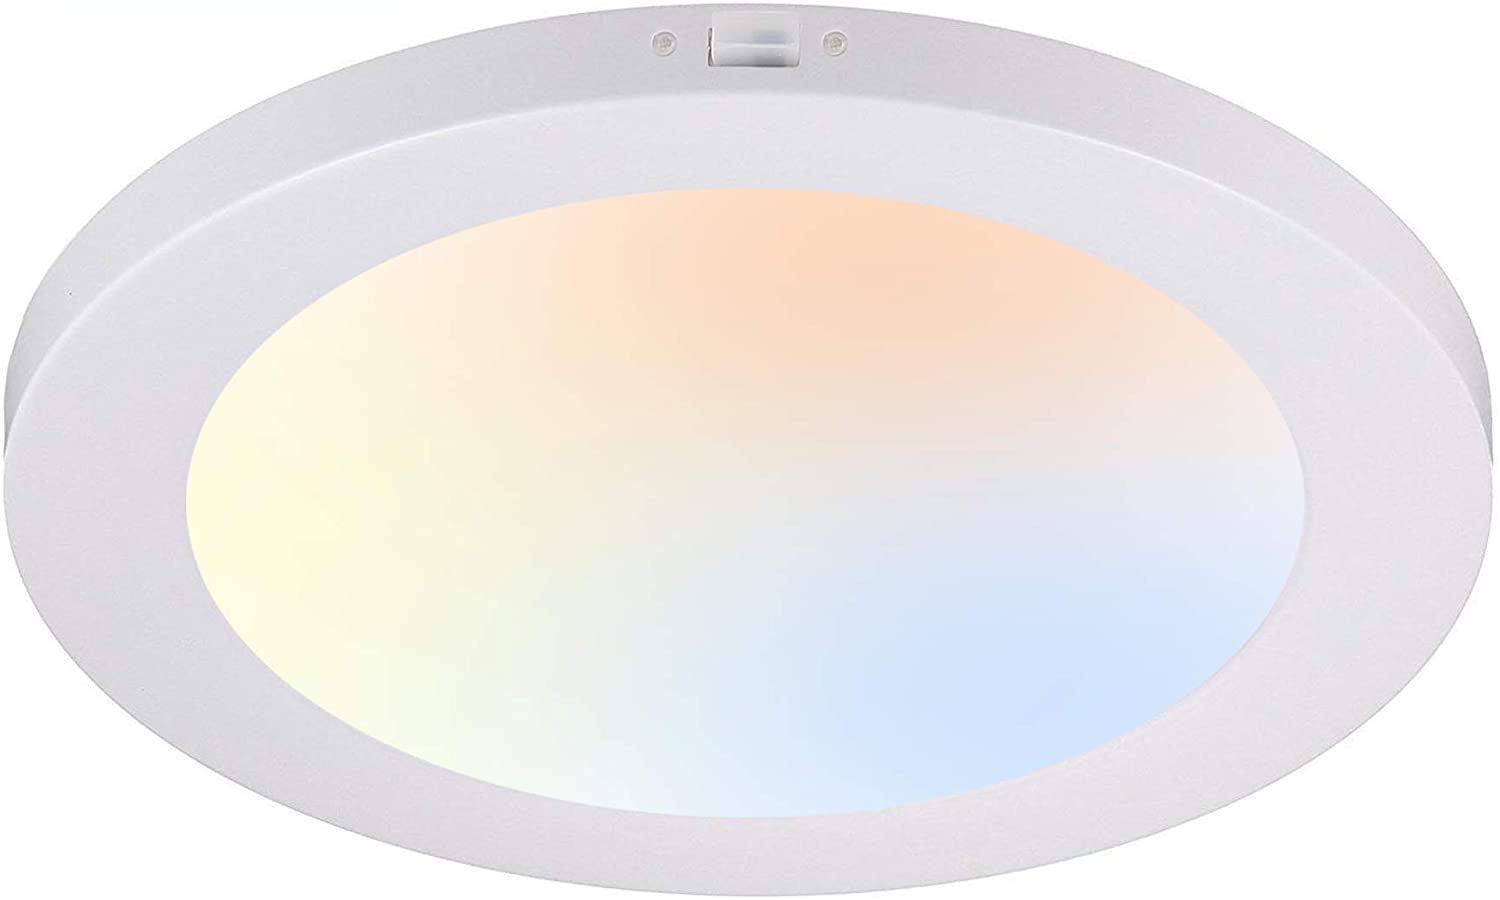 Cloudy Bay 12 Inch LED Flush Mount Ceiling Light